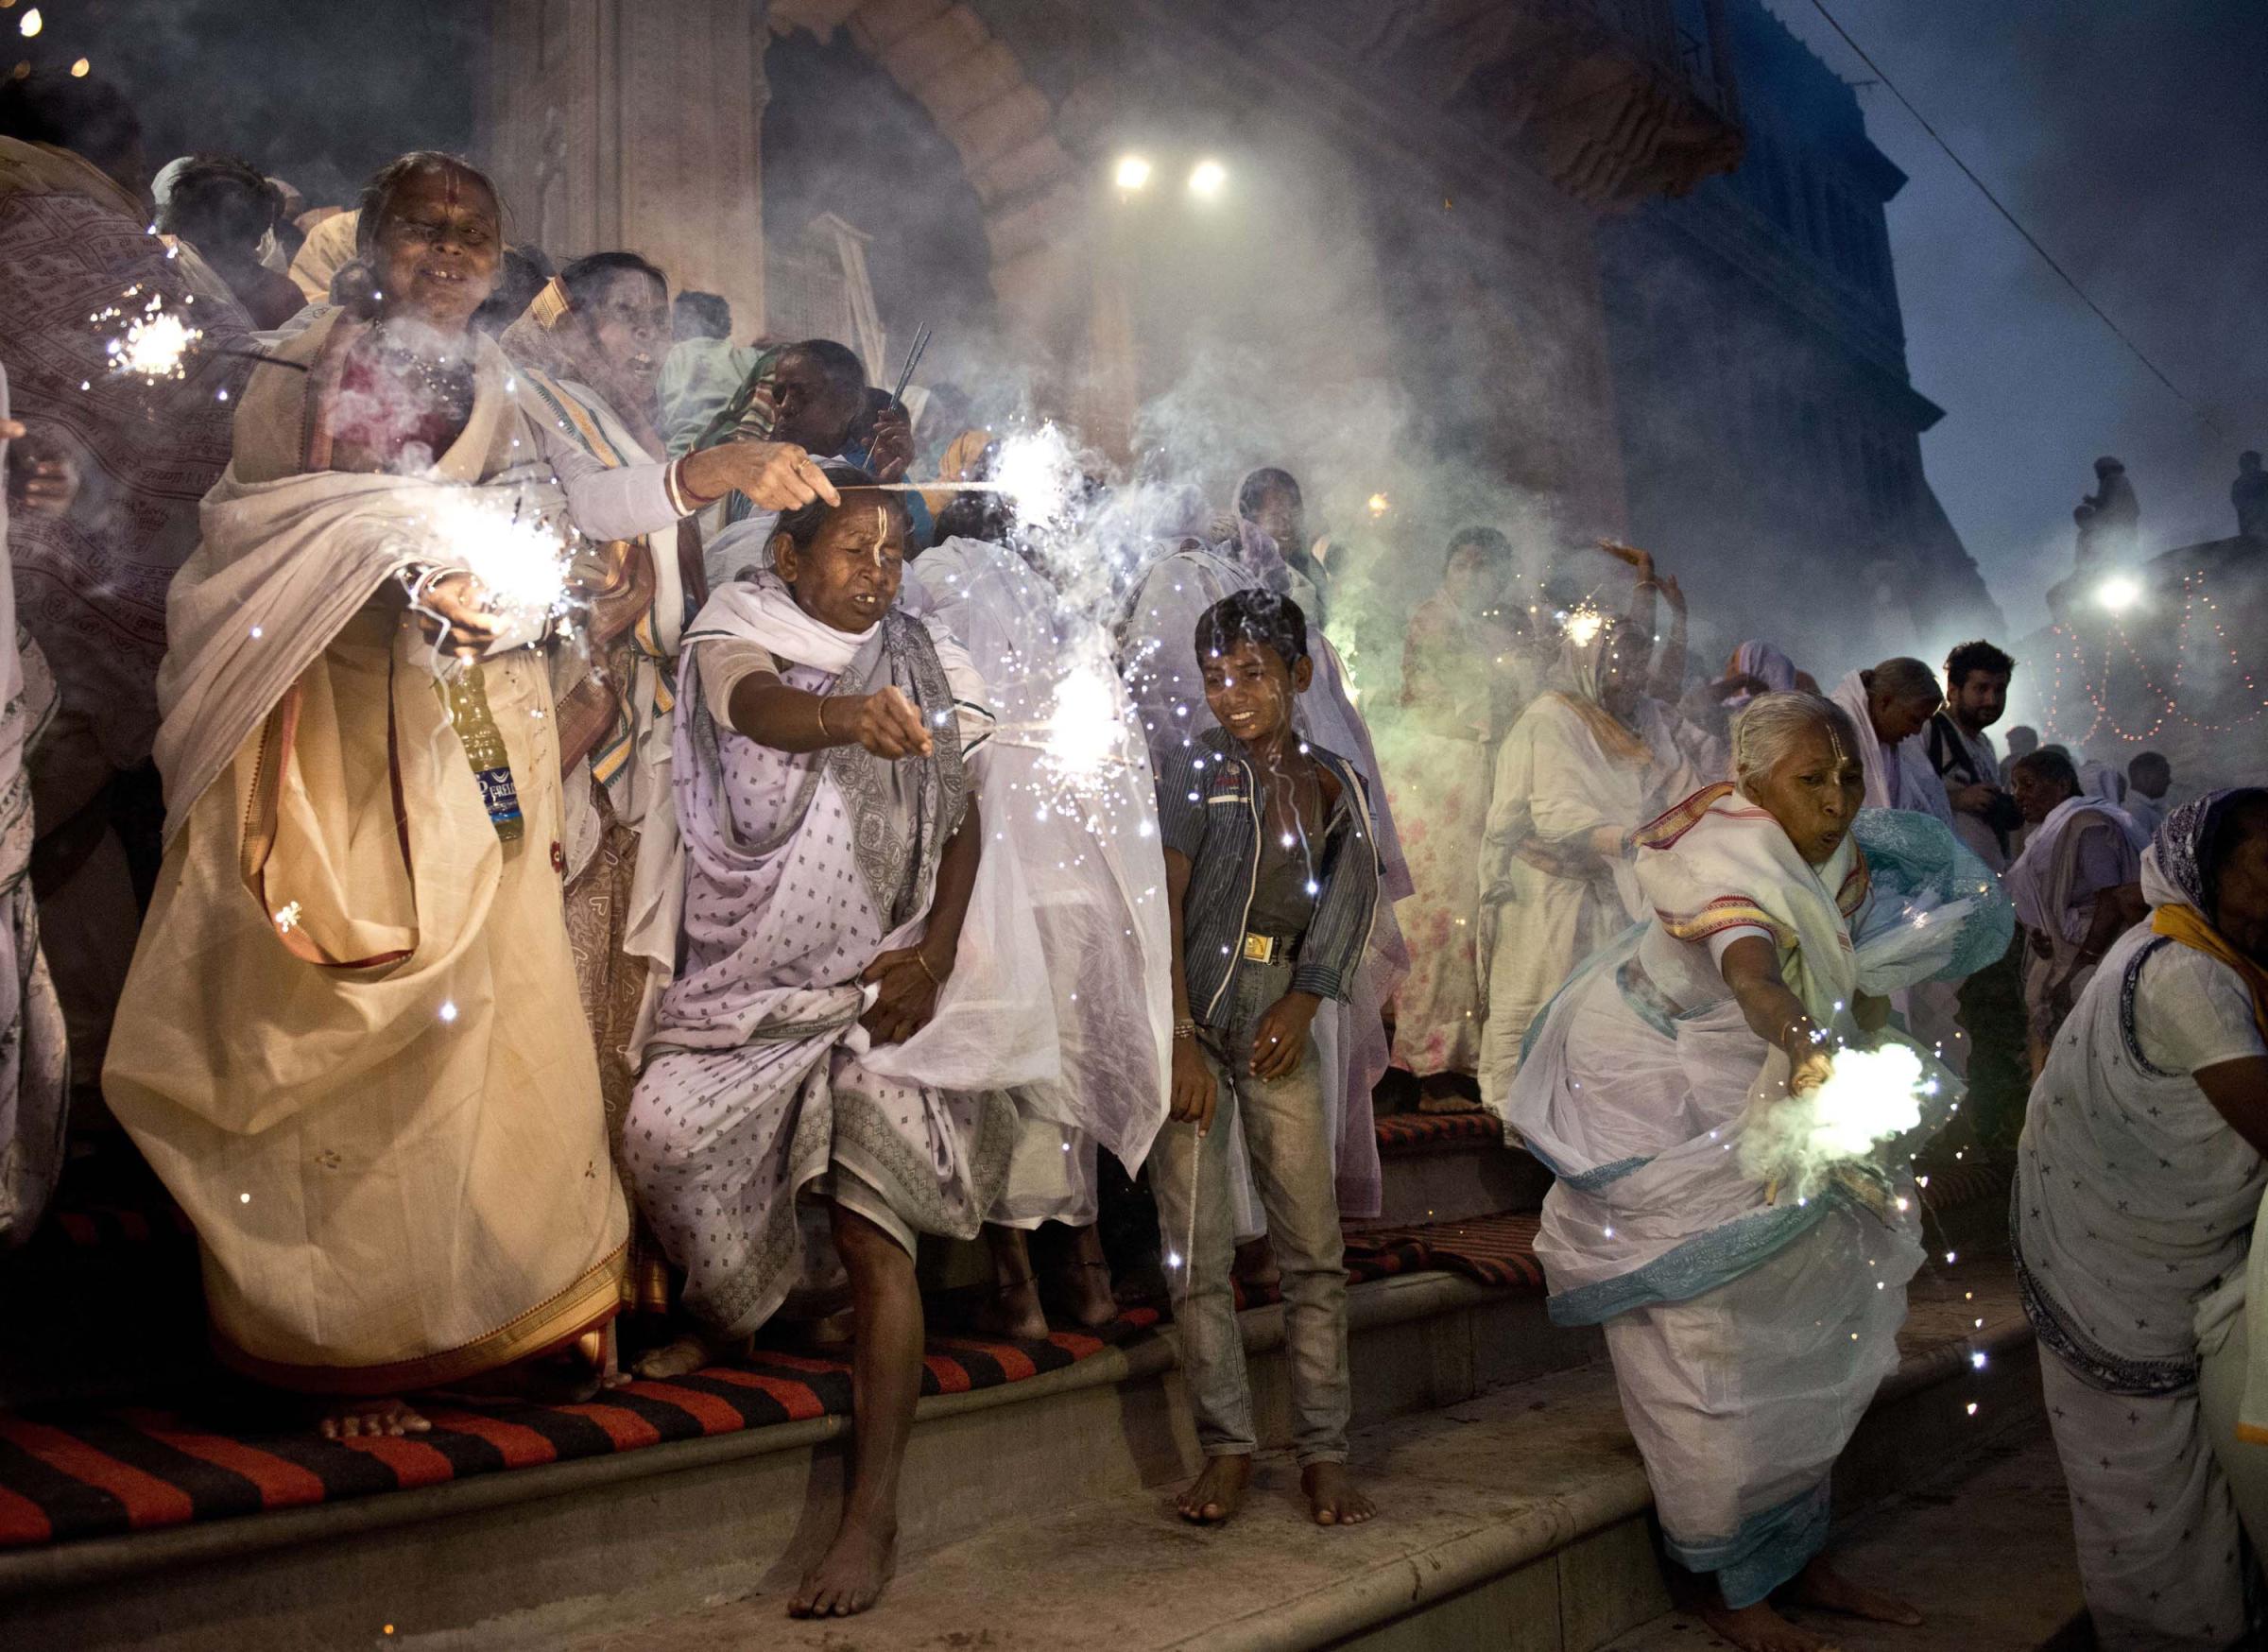 Indian widows wave sparklers as they participate in a celebration for the Hindu festival Diwali on the banks of the Yamuna river in the northern city of Vrindavan on Oct. 21, 2014.